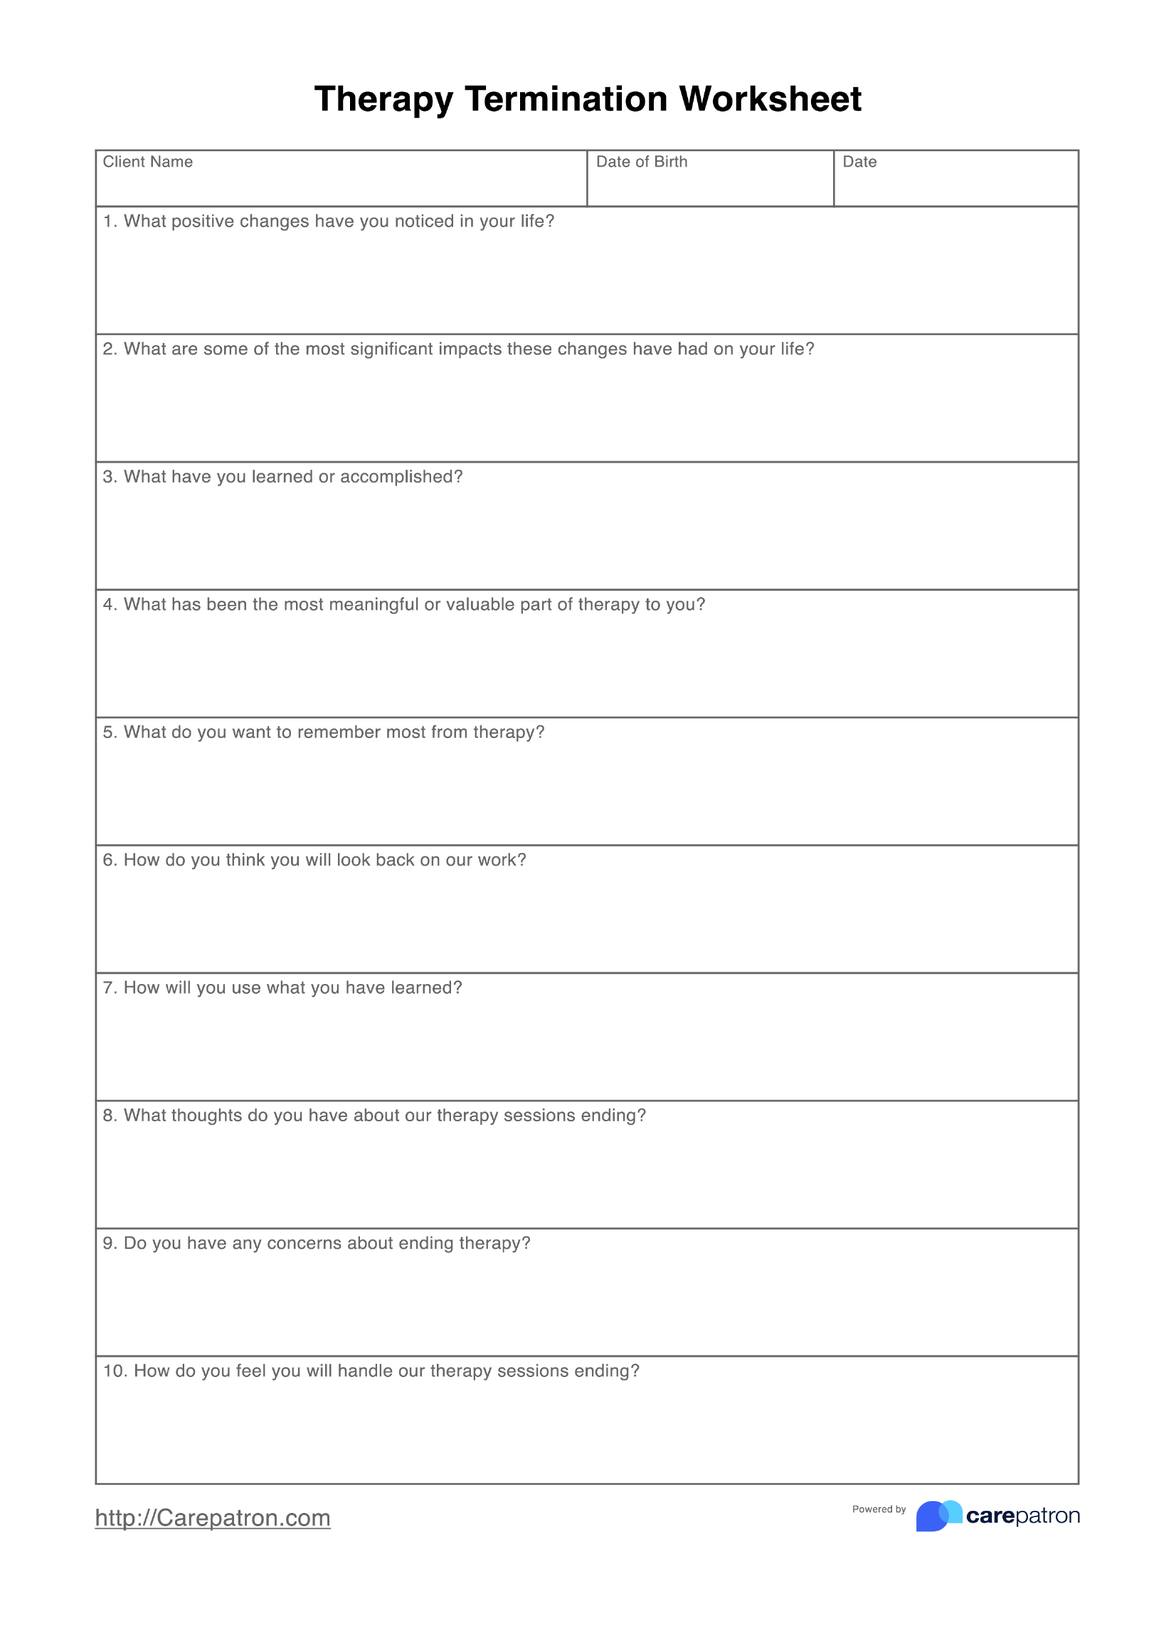 Therapy Termination Worksheet PDF Example